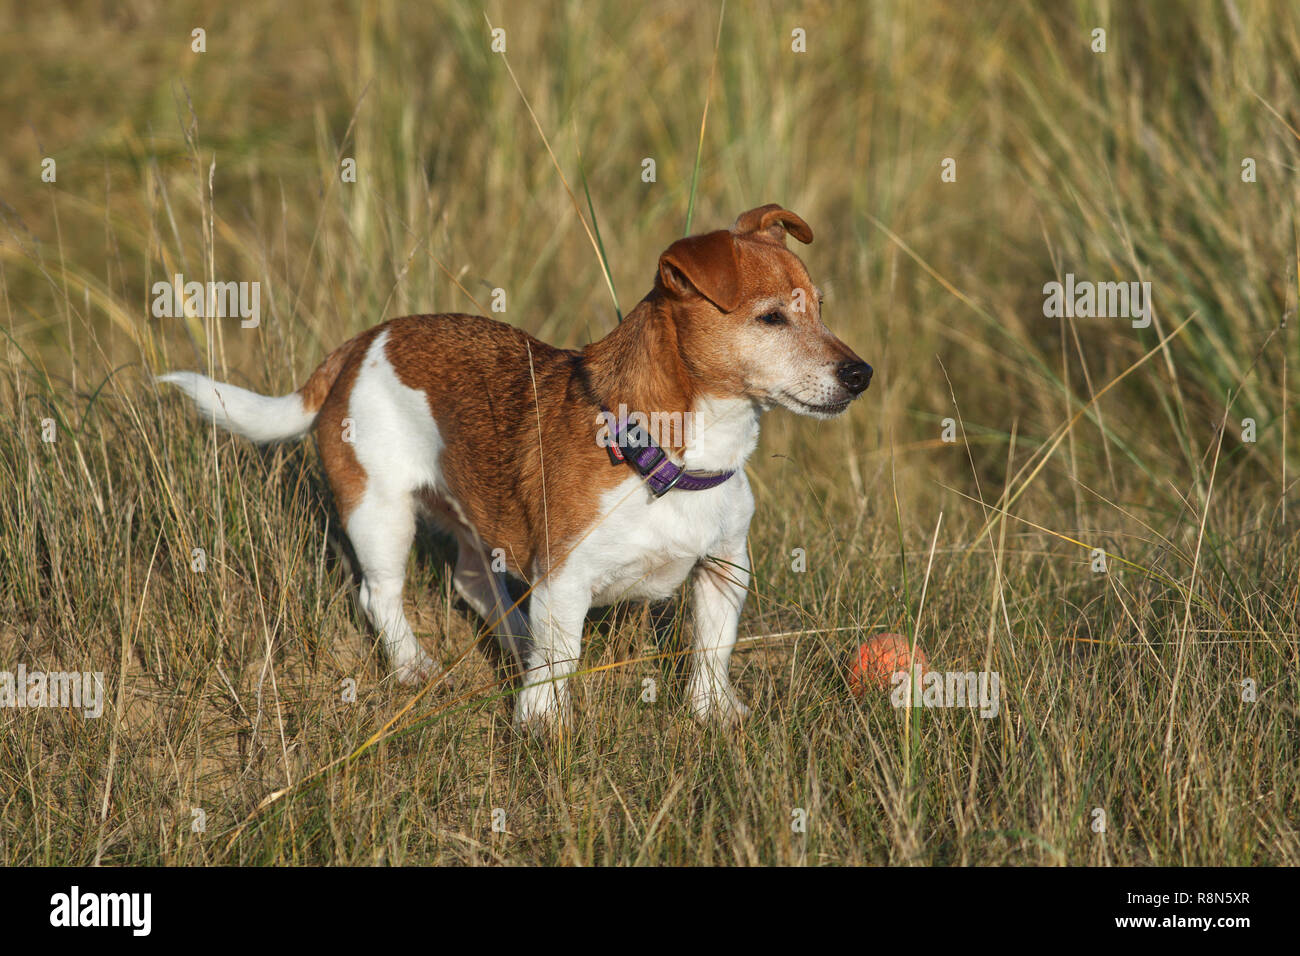 Small brown and white Jack Russell dog playing in sand dunes with a red ball, wearing. Purple collar Stock Photo